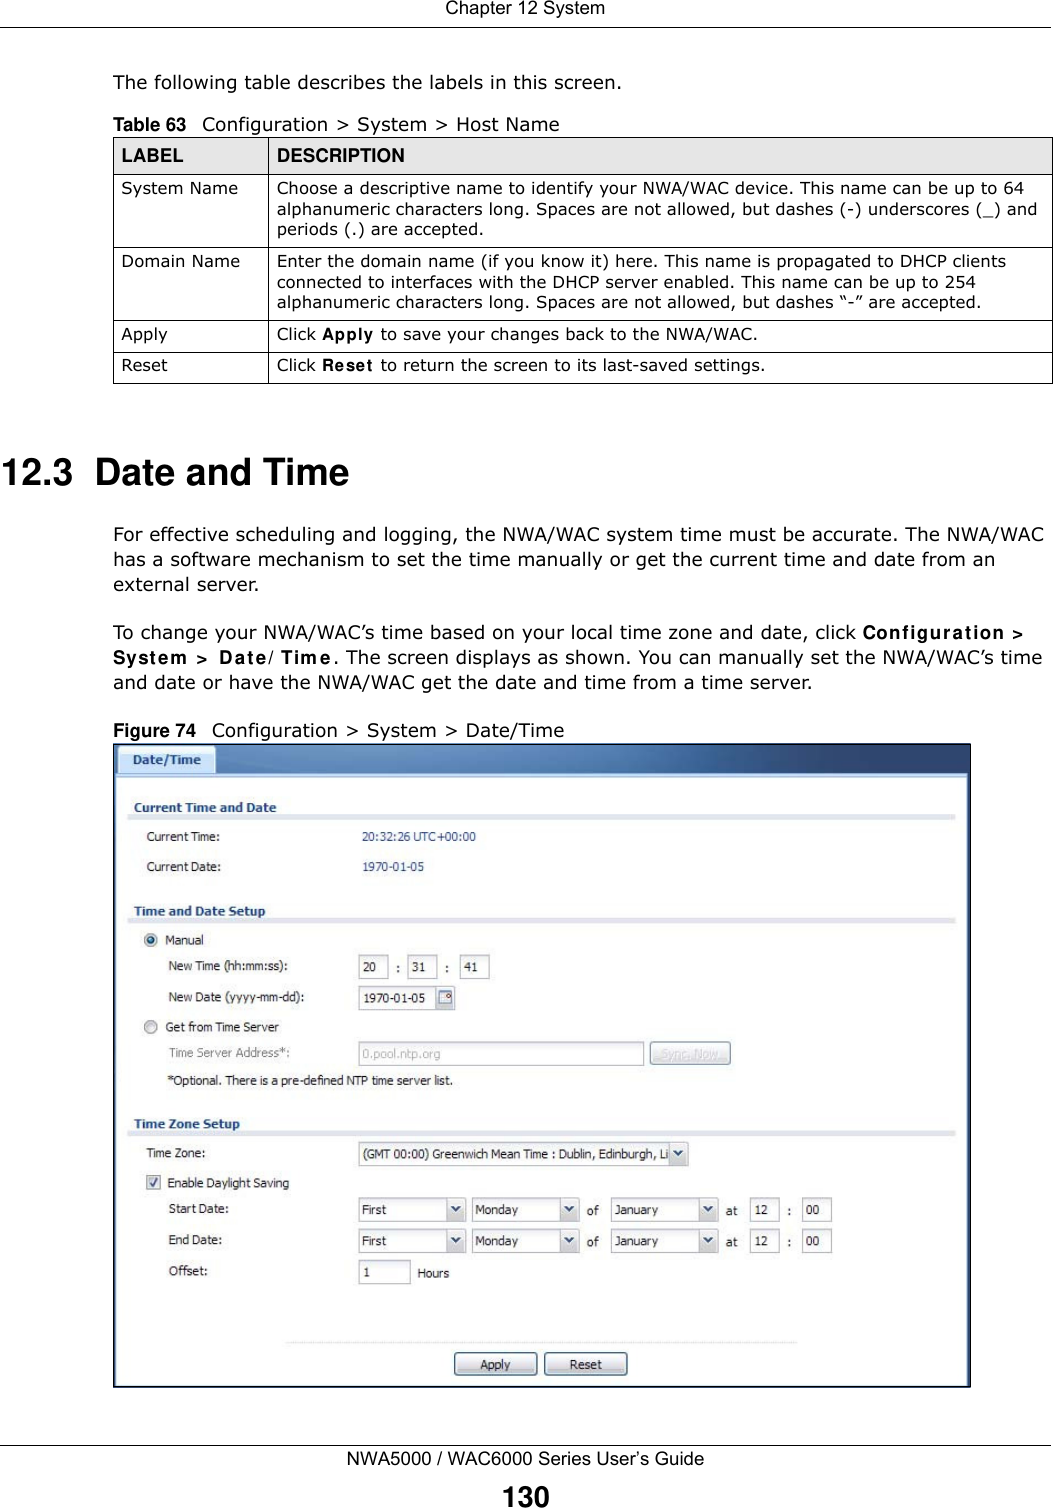 Chapter 12 SystemNWA5000 / WAC6000 Series User’s Guide130The following table describes the labels in this screen. 12.3  Date and Time For effective scheduling and logging, the NWA/WAC system time must be accurate. The NWA/WAC has a software mechanism to set the time manually or get the current time and date from an external server.To change your NWA/WAC’s time based on your local time zone and date, click Configuration &gt; System &gt; Date/Time. The screen displays as shown. You can manually set the NWA/WAC’s time and date or have the NWA/WAC get the date and time from a time server.Figure 74   Configuration &gt; System &gt; Date/TimeTable 63   Configuration &gt; System &gt; Host NameLABEL DESCRIPTIONSystem Name Choose a descriptive name to identify your NWA/WAC device. This name can be up to 64 alphanumeric characters long. Spaces are not allowed, but dashes (-) underscores (_) and periods (.) are accepted.Domain Name Enter the domain name (if you know it) here. This name is propagated to DHCP clients connected to interfaces with the DHCP server enabled. This name can be up to 254 alphanumeric characters long. Spaces are not allowed, but dashes “-” are accepted.Apply Click Apply to save your changes back to the NWA/WAC.Reset Click Reset to return the screen to its last-saved settings. 